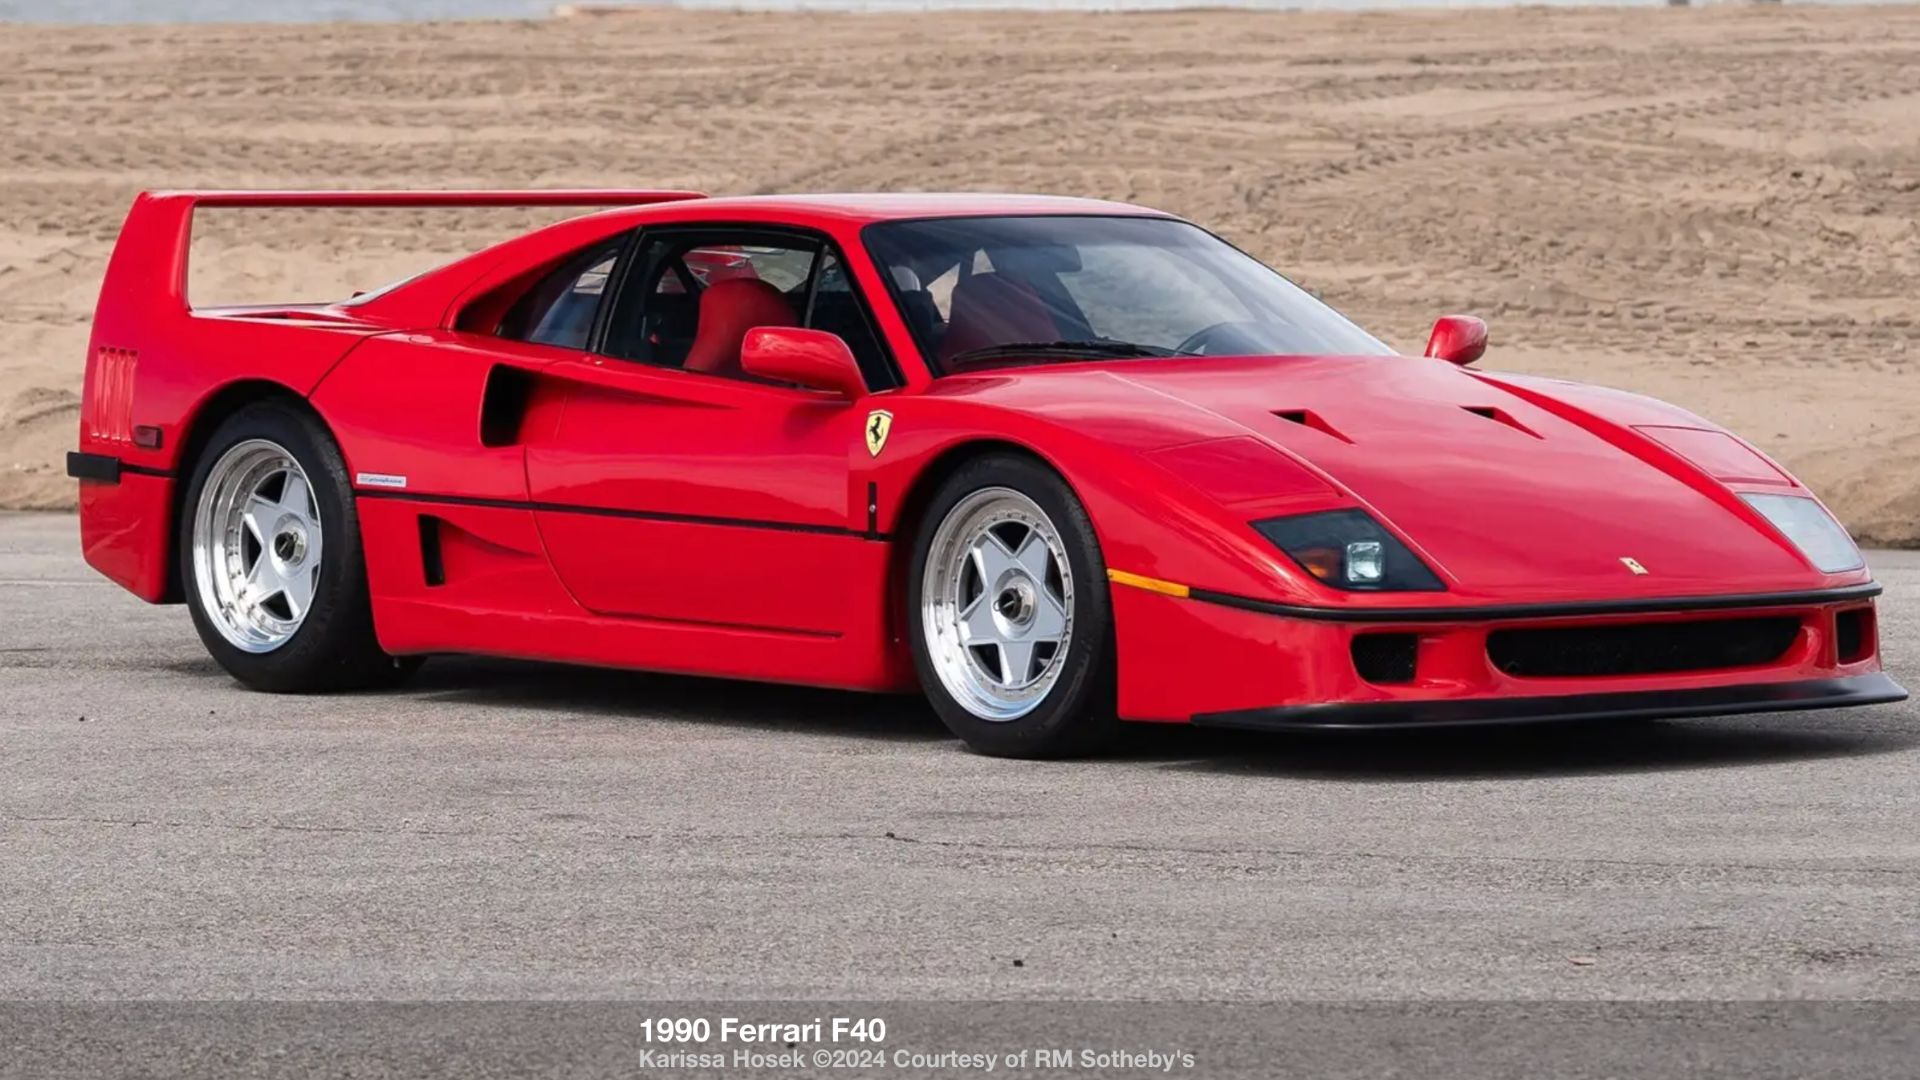 Iconic 1990 Ferrari F40 Emerges from Two Decades of Loving Ownership